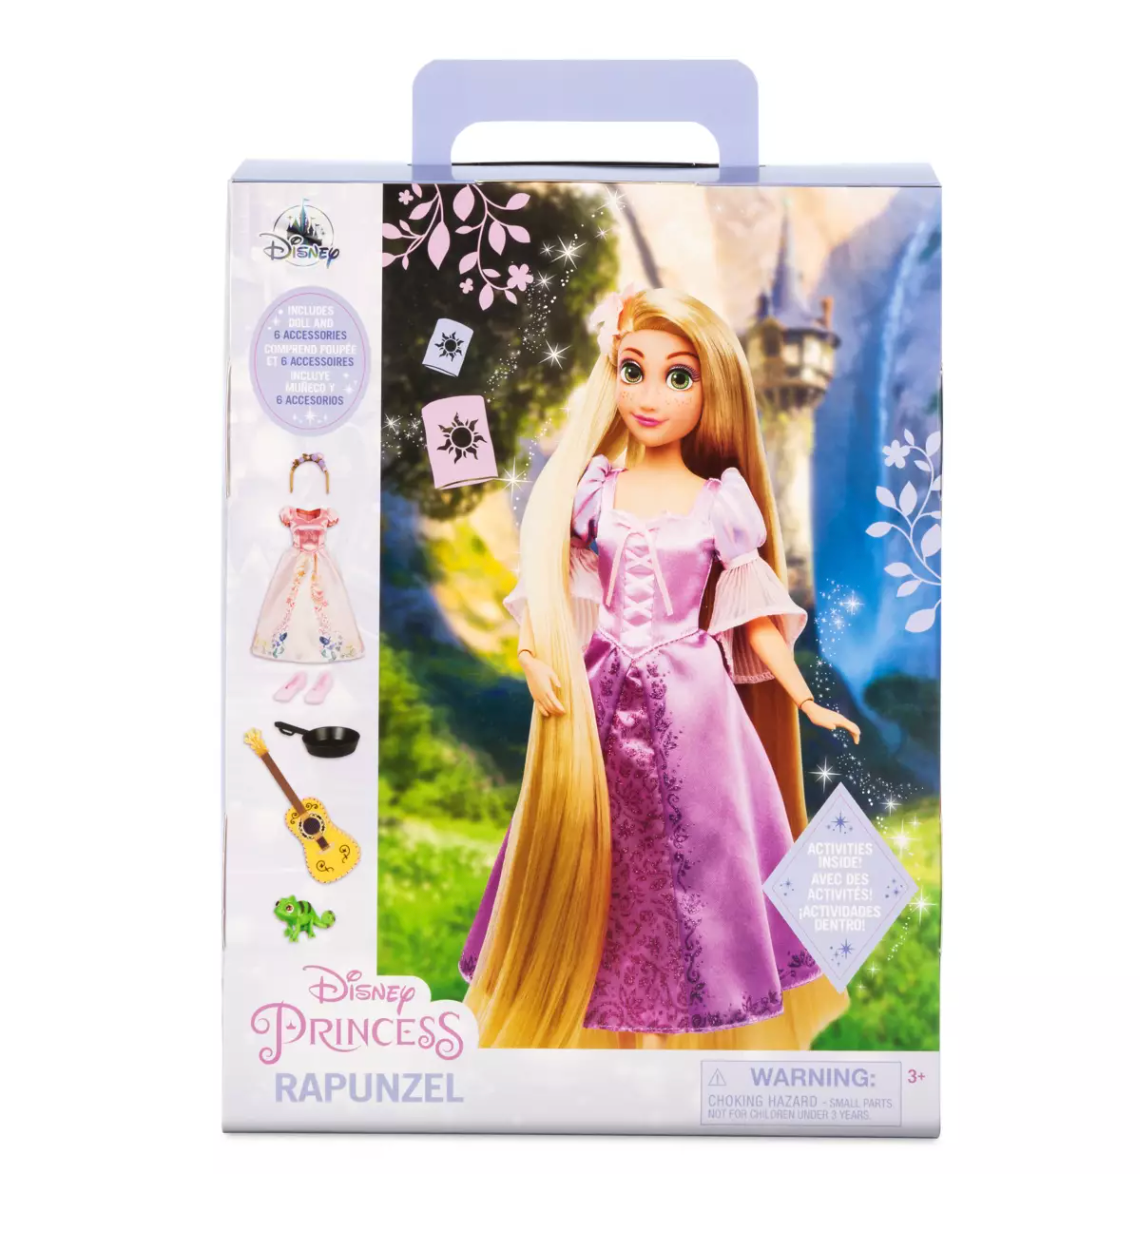 Disney Story Doll with Accessories and Activity Tangled Rapunzel New with Box